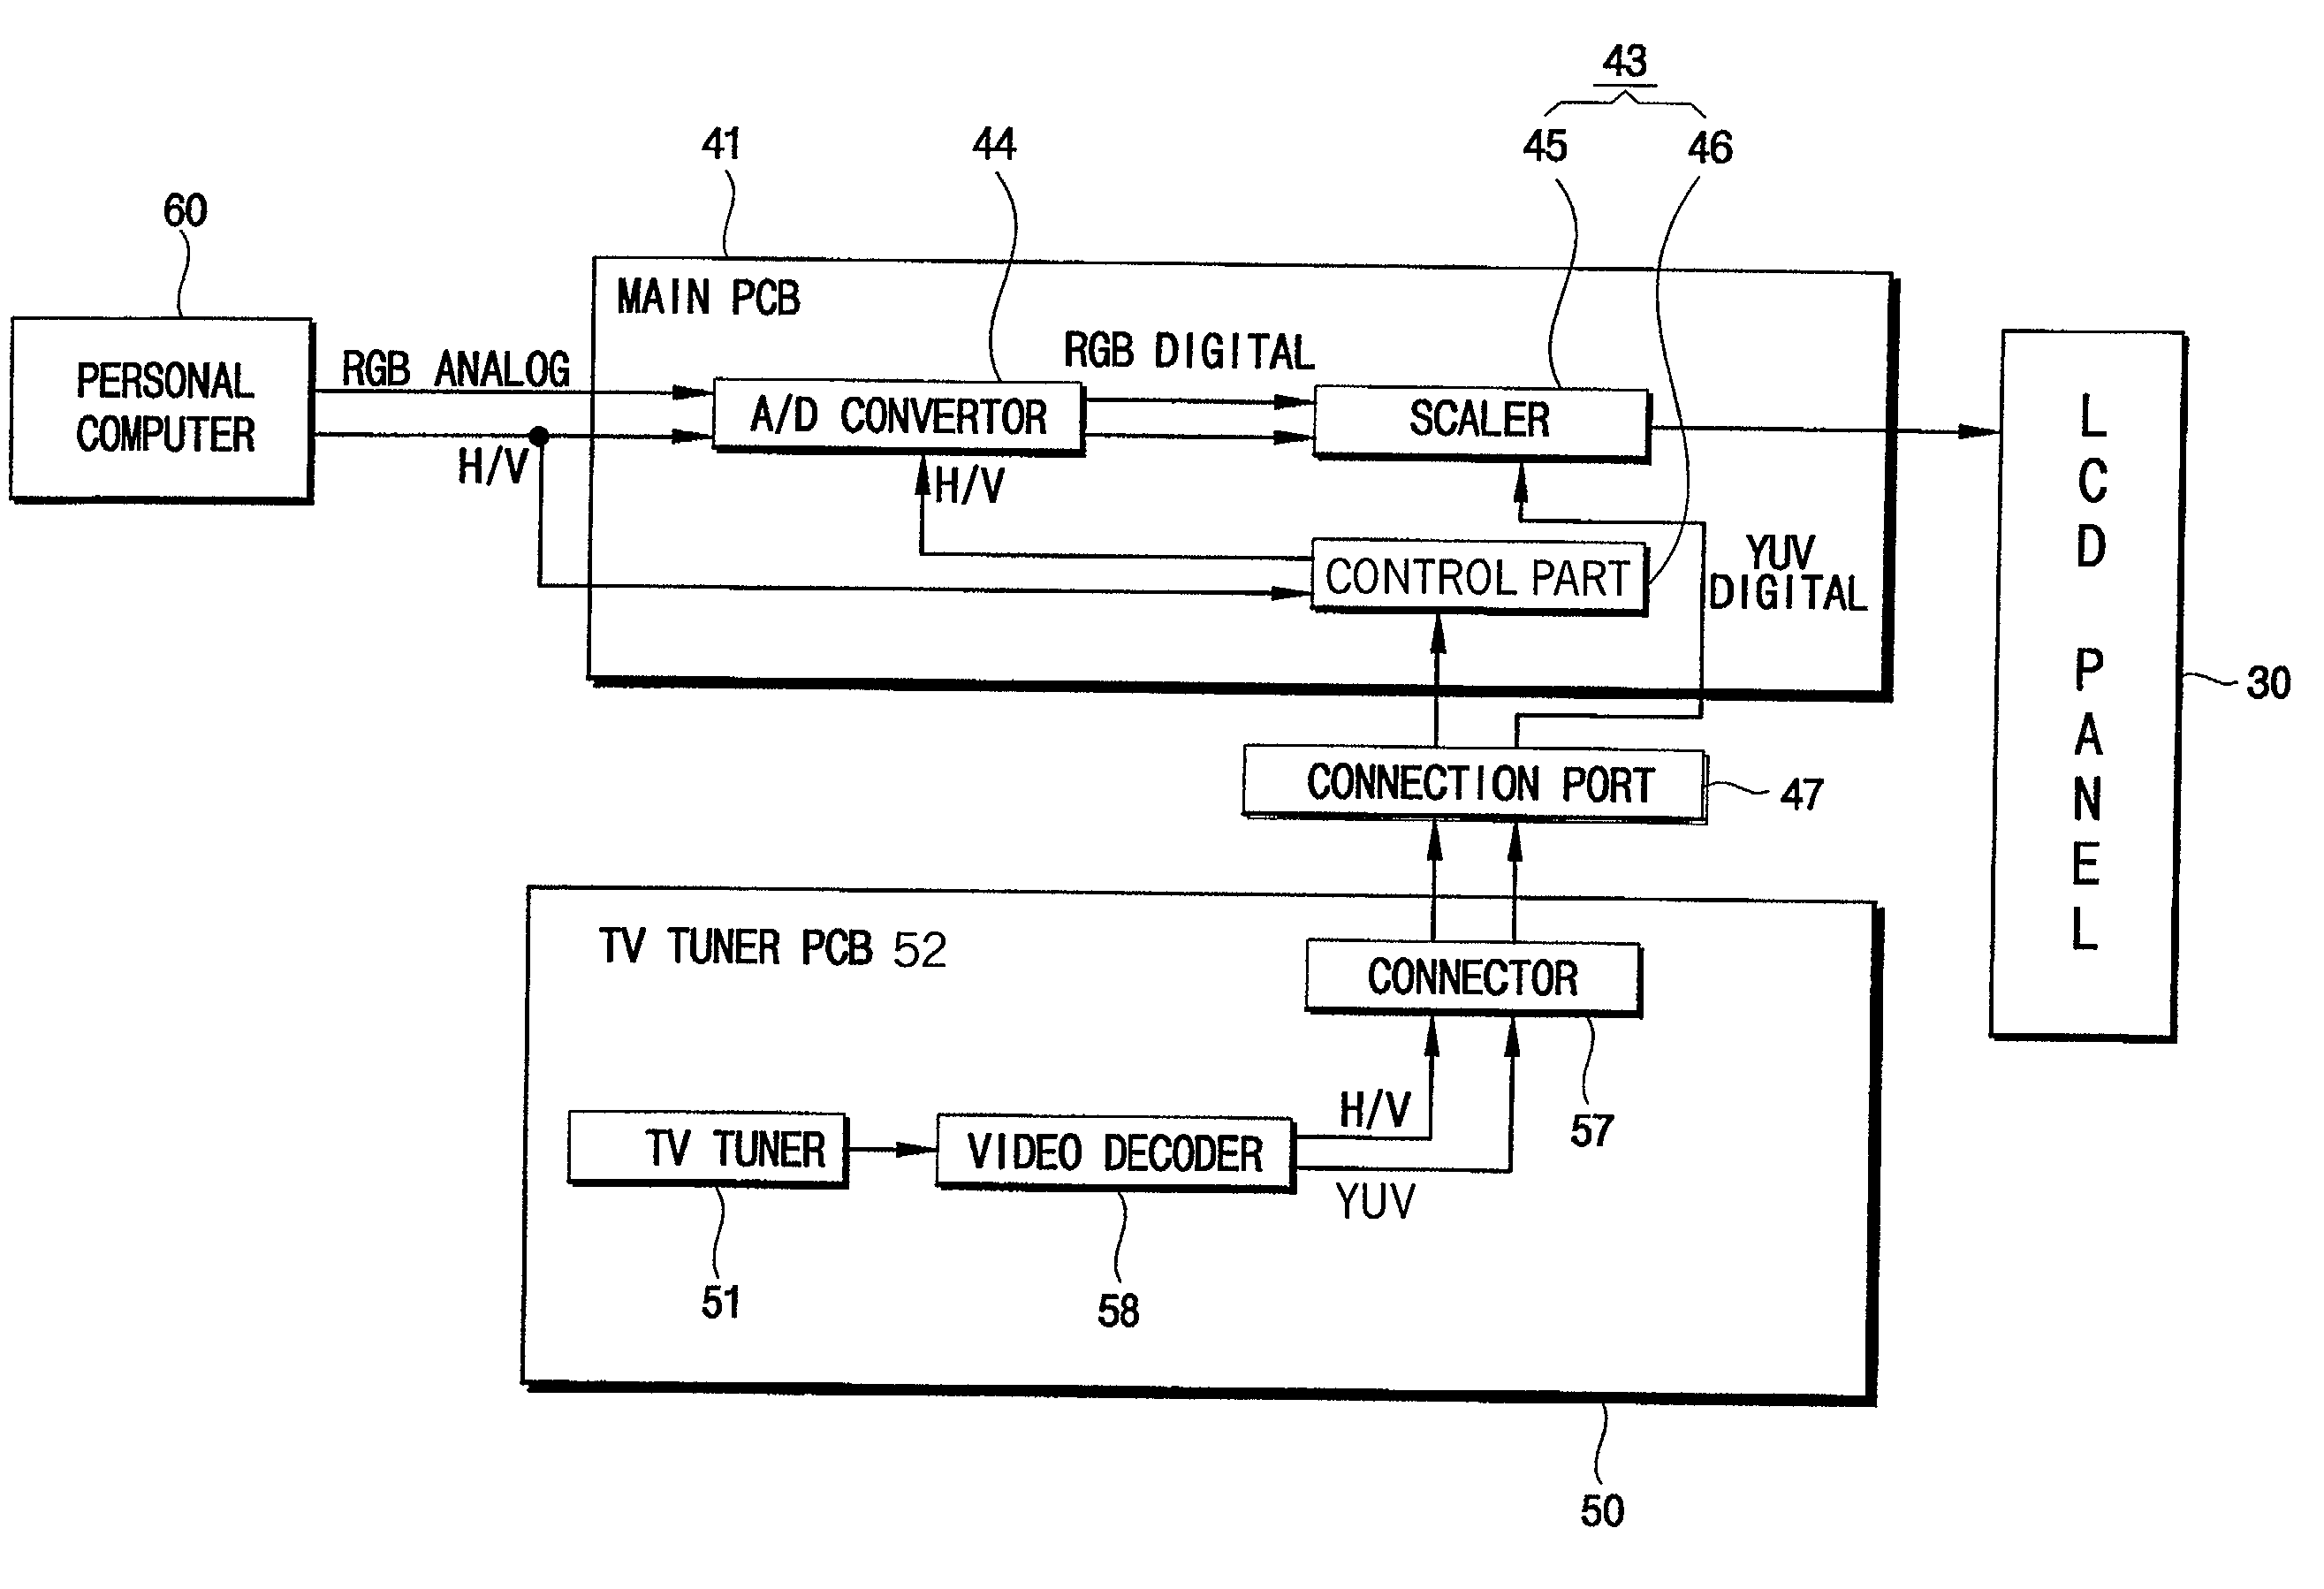 Display apparatus and a tuner mounted thereon